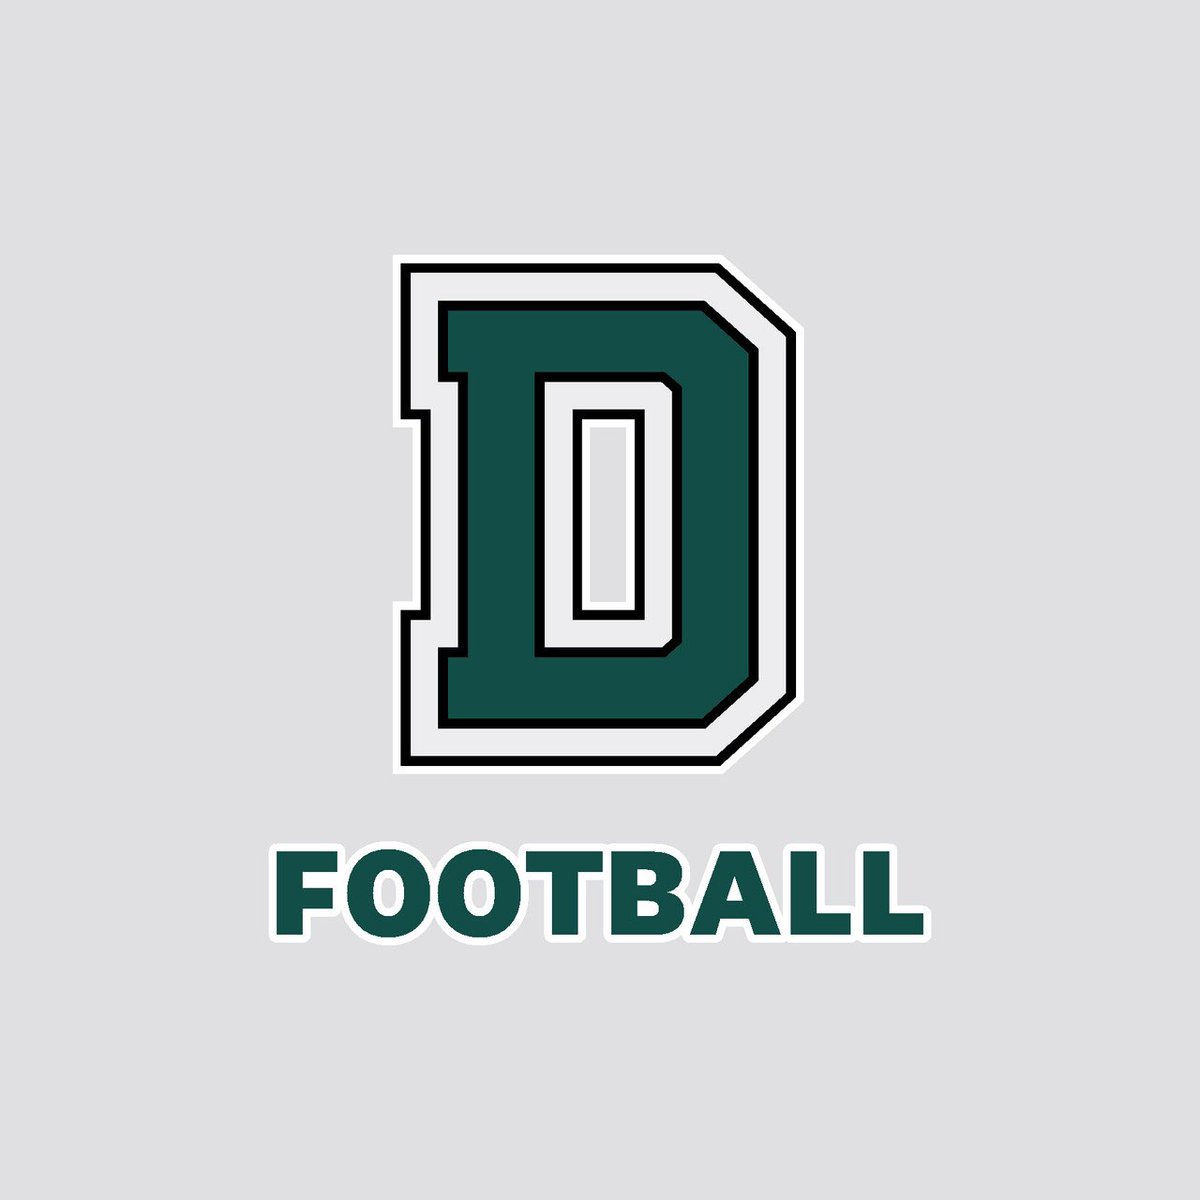 Thankful for @grayson_kline and @DartmouthFTBL for coming by our morning workout today. We are honored that you stopped by to recruit our Hawks. #BUILTBYBETHEL